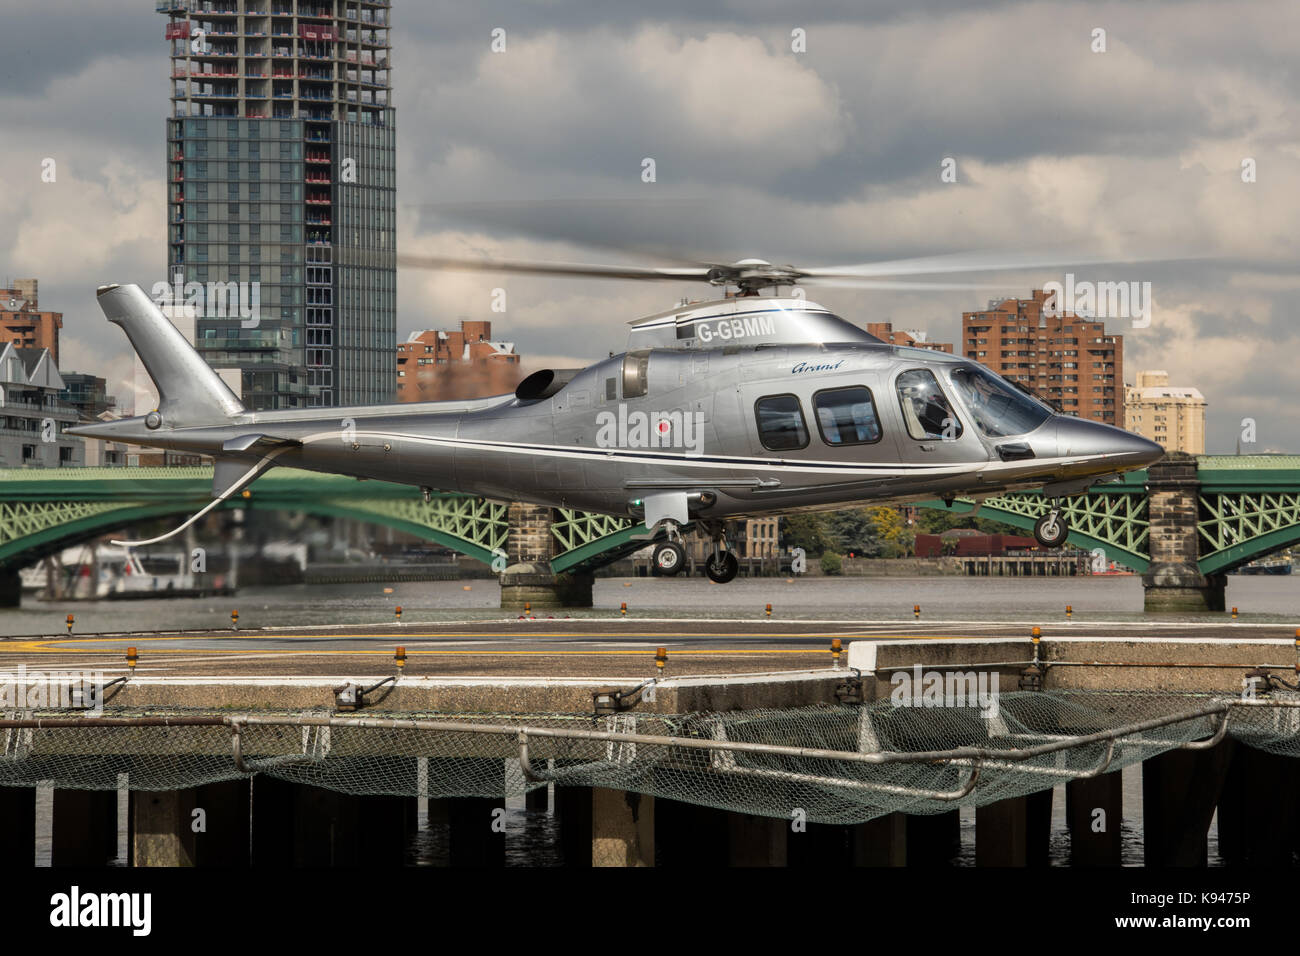 Agusta A109s grand : G-GBMM atterrissage à Londres Heliport Banque D'Images